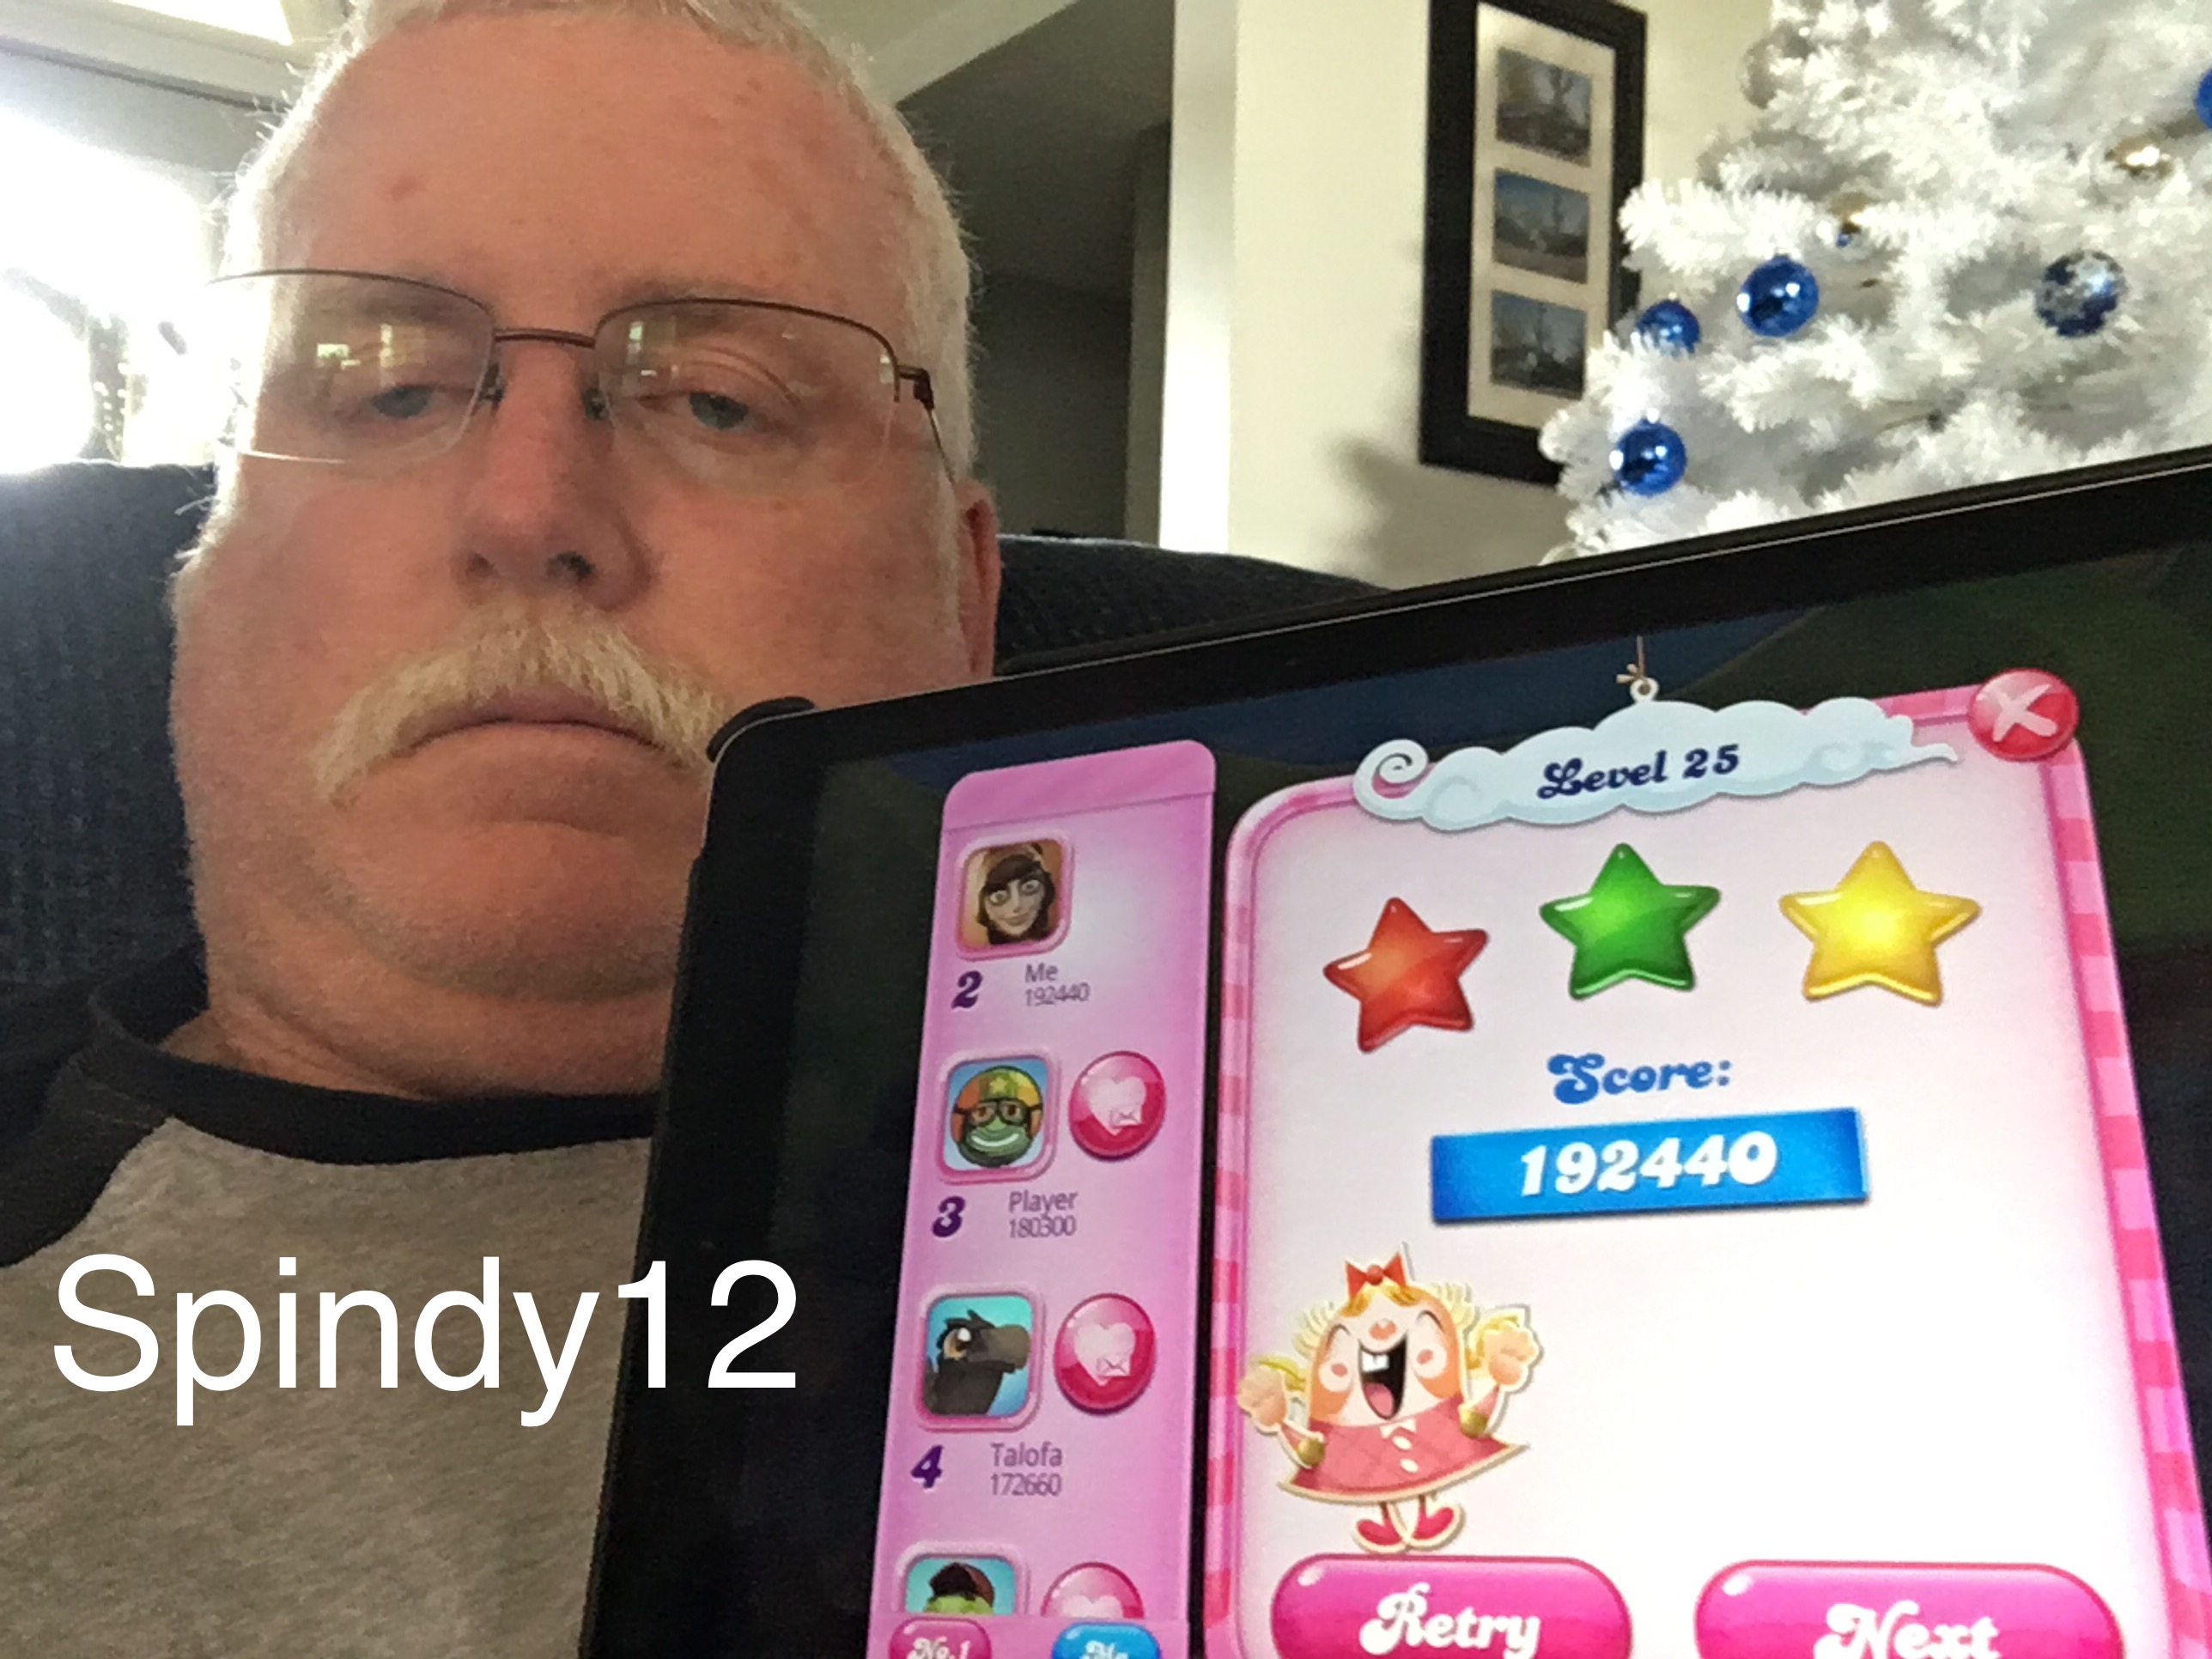 Spindy12: Candy Crush Saga: Level 025 (iOS) 192,440 points on 2016-12-21 17:26:54